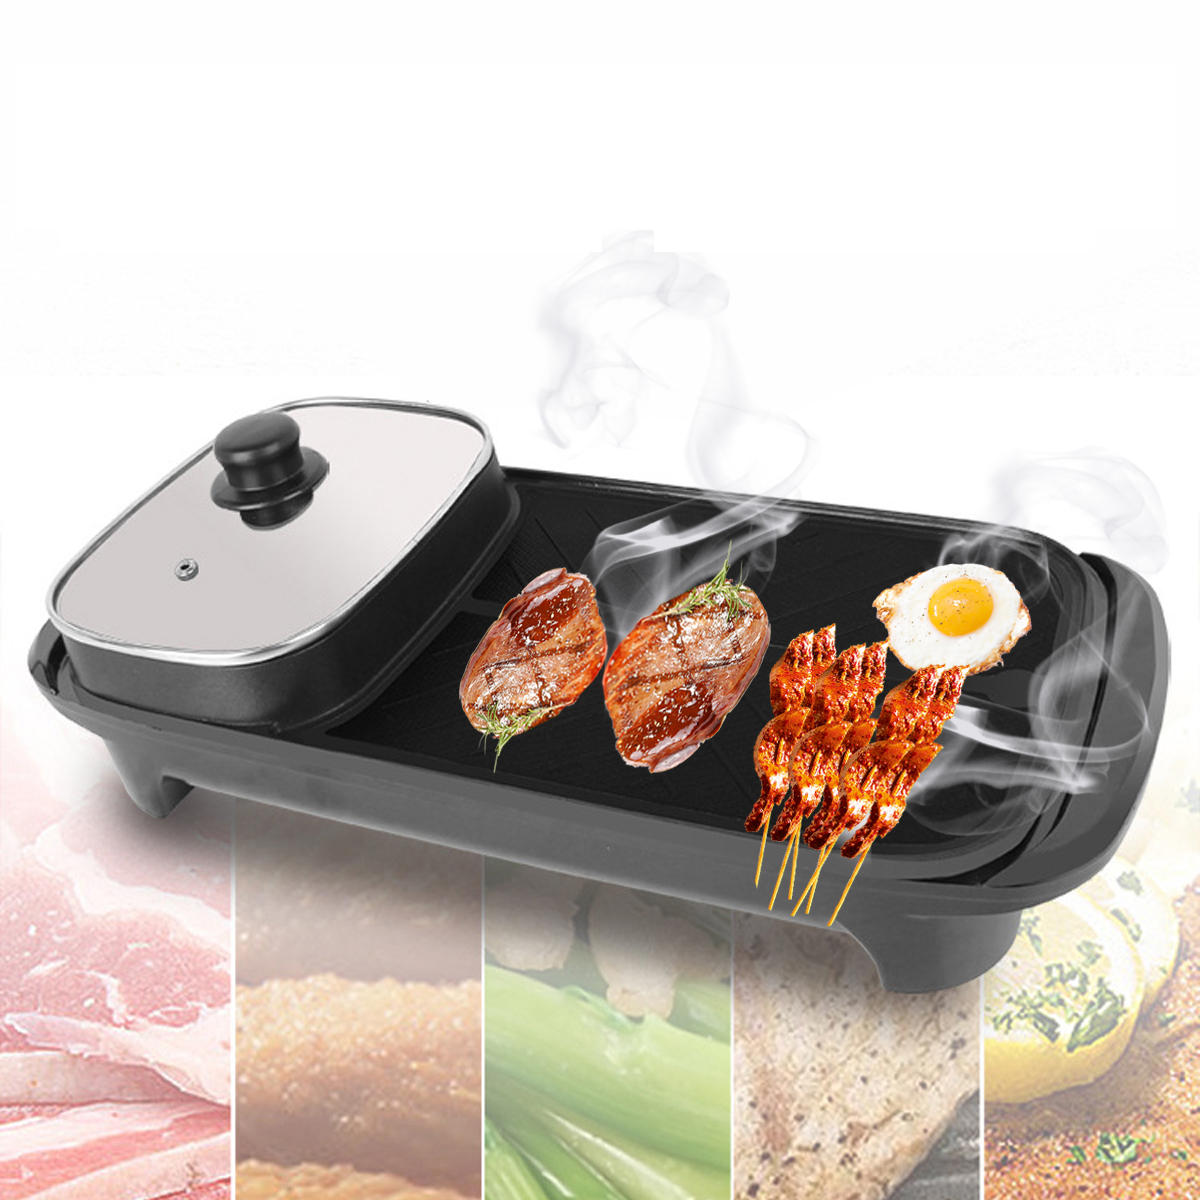 2-In-1 220V 1360W Electric Teppanyaki Barbecue BBQ Grill Pan Table Hotpot Oven Cooking Stove